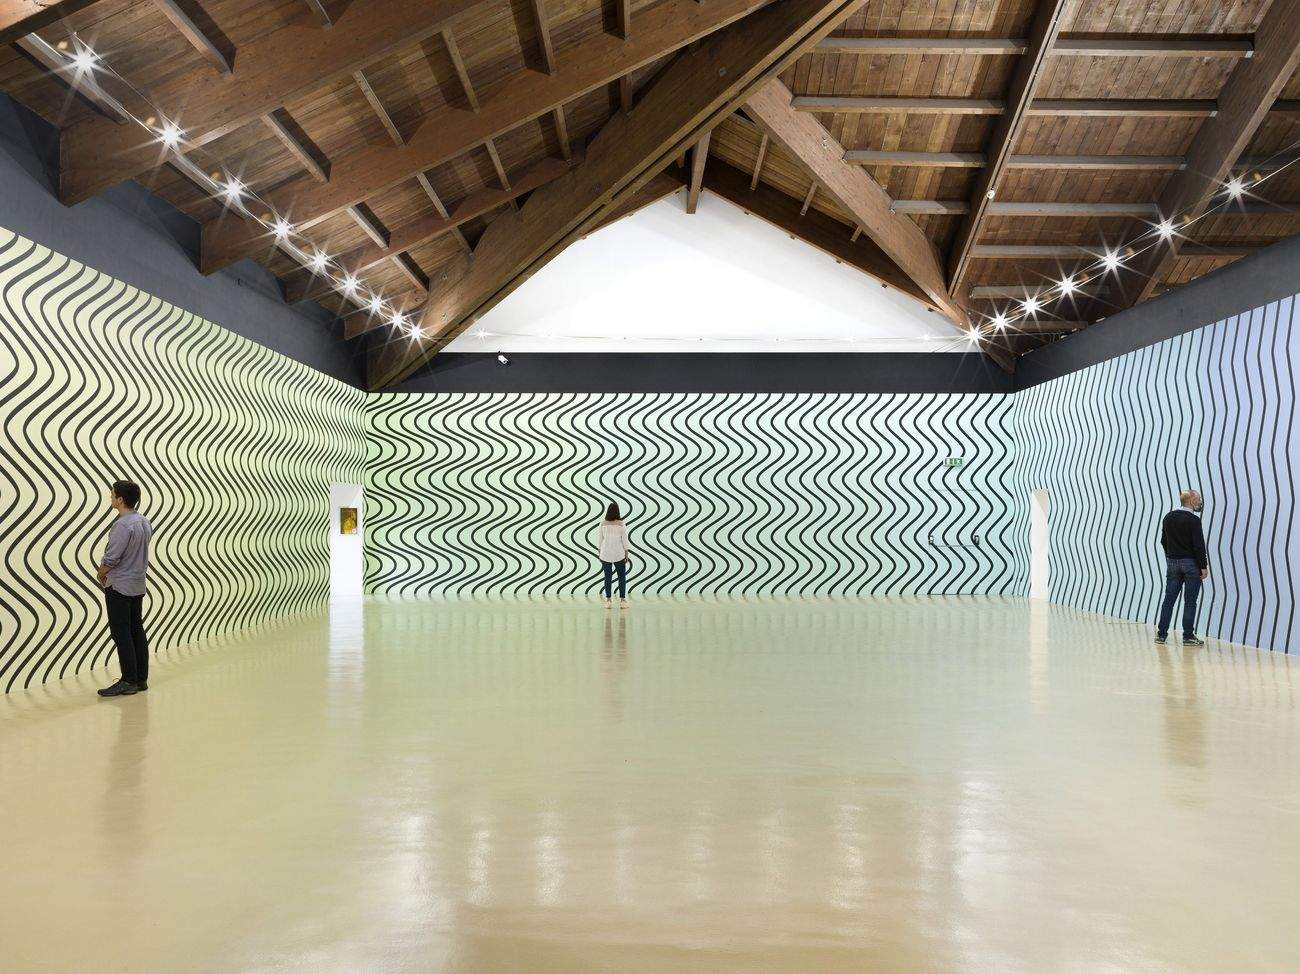 One of Italy's largest contemporary art museums becomes a vaccination center